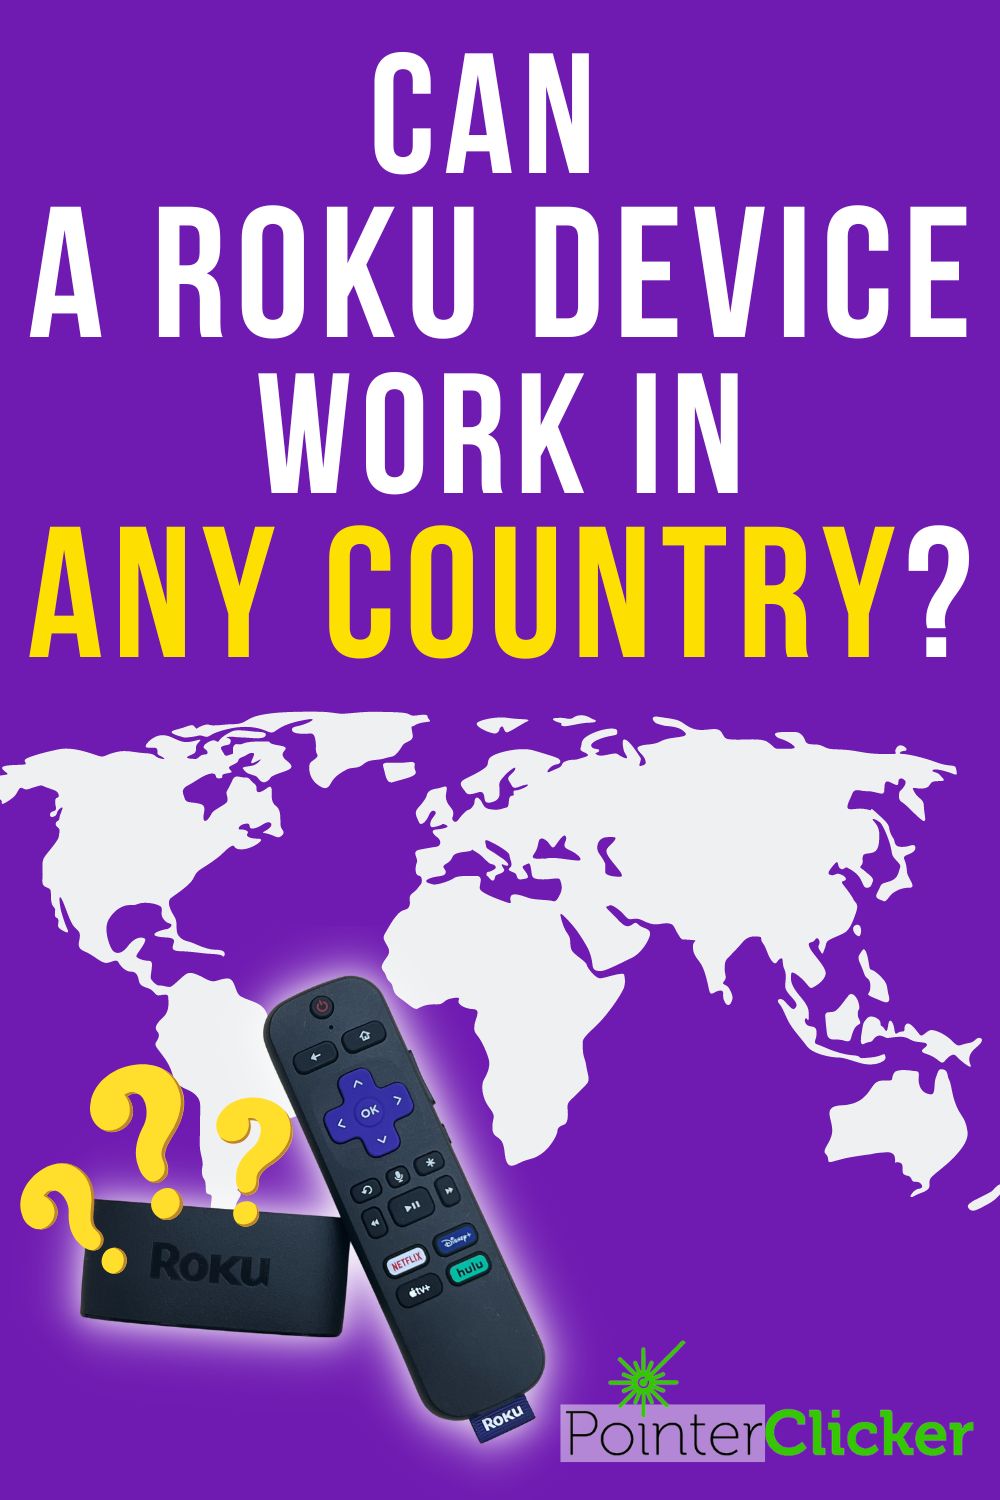 can roku device work in any country - pinterest image